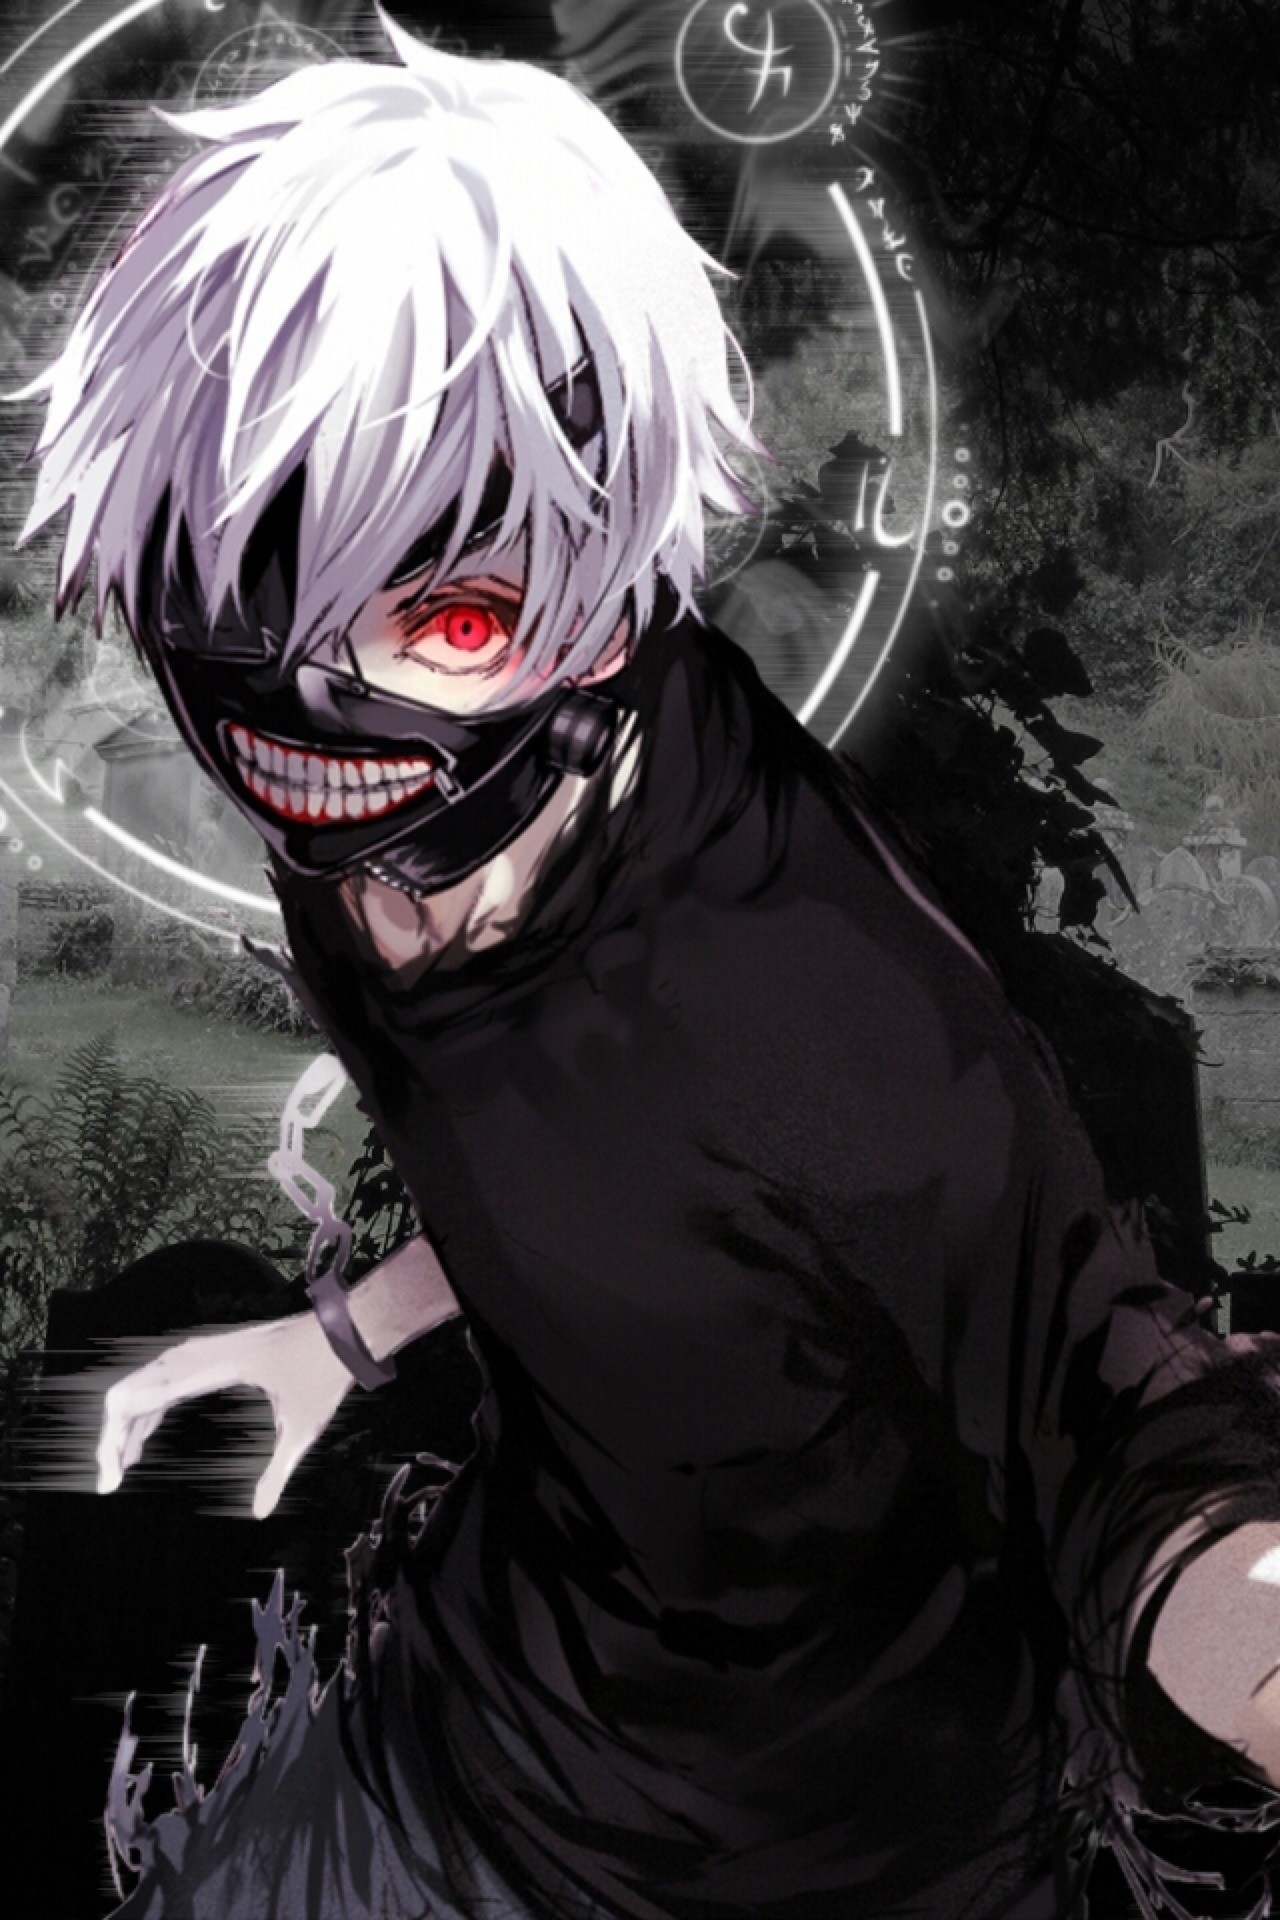 Tokyo Ghoul Iphone Wallpaper (76+ Images)